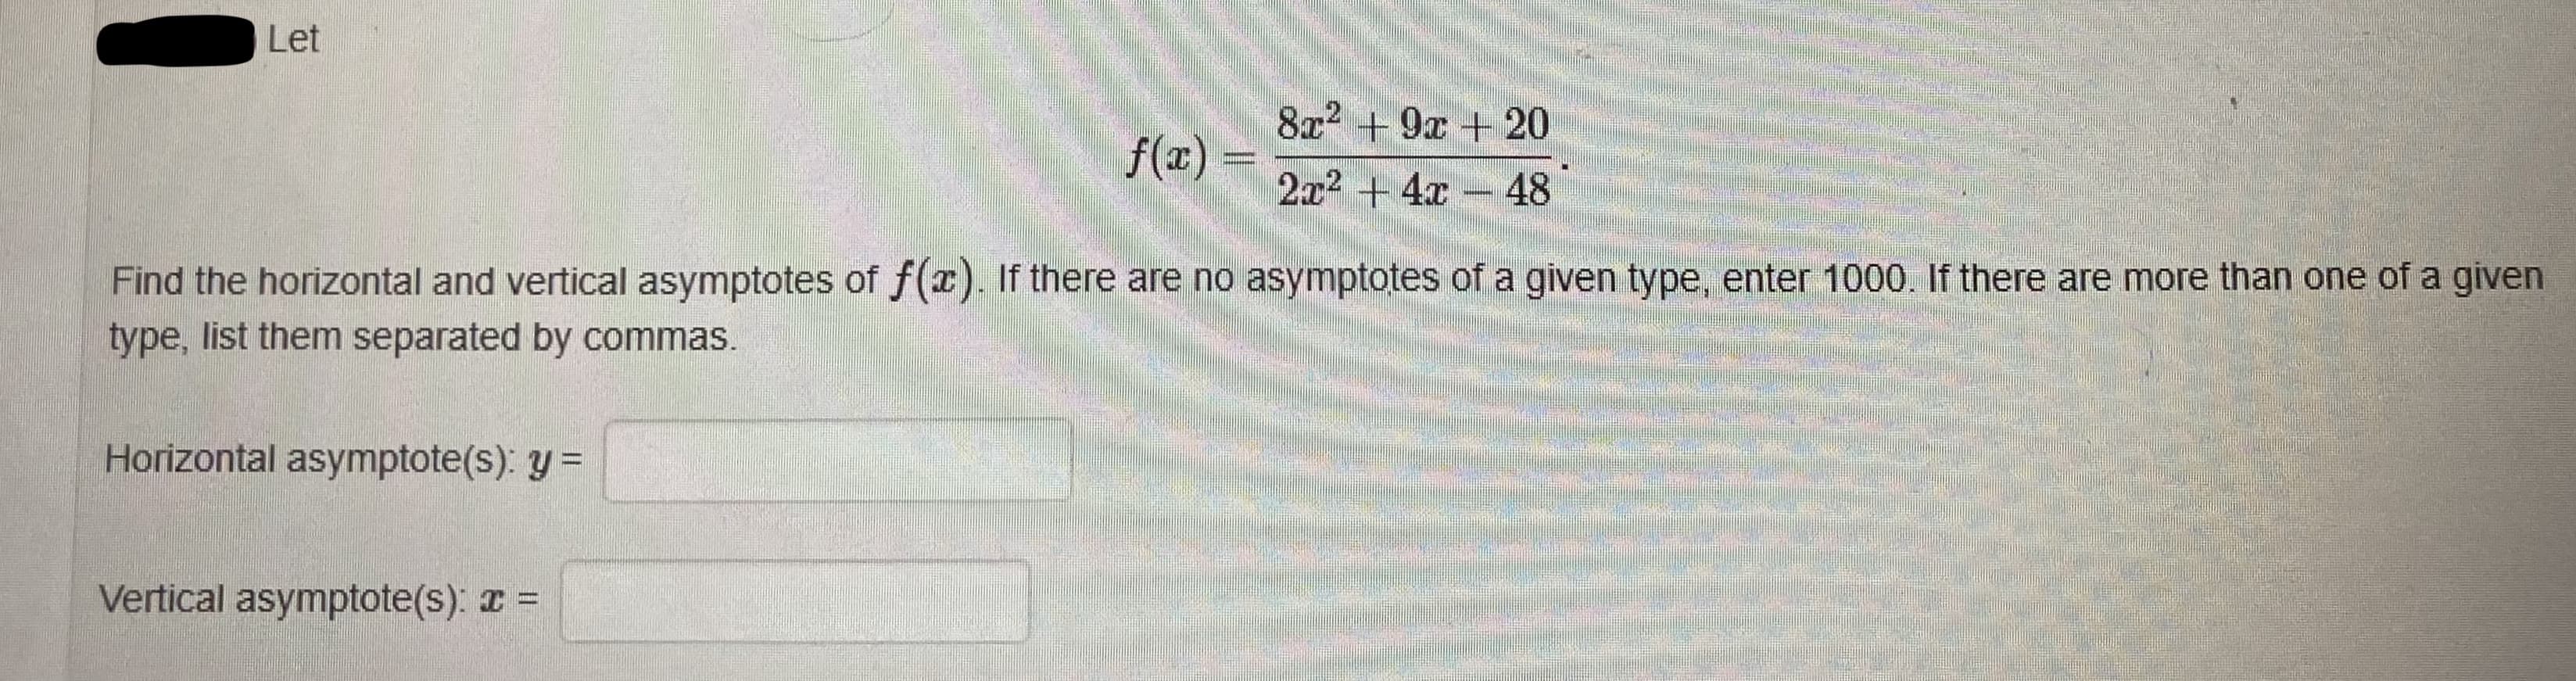 8x2 + 9x +20
f(x) =
2x2 + 4x - 48
Find the horizontal and vertical asymptotes of f(a). If there are no asymptotes of a given type, enter 1000. If there are more than one of a given
type, list them separated by commas.
Horizontal asymptote(s): y =
Vertical asymptote(s): z =
